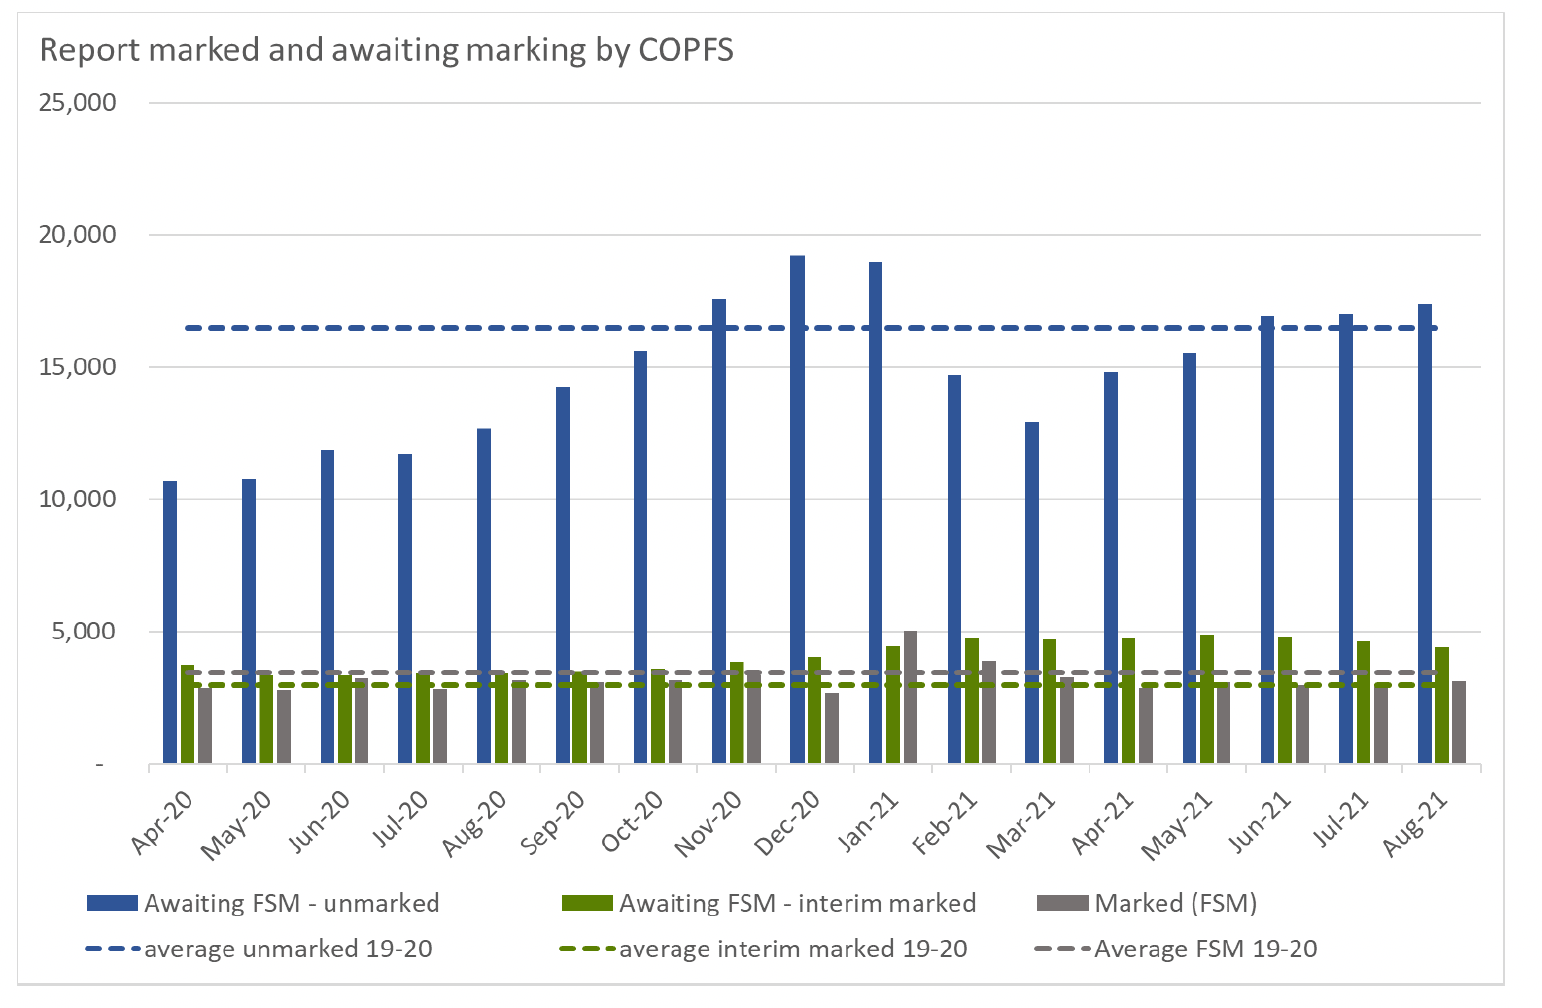 Bar chart showing marking status of COPFS reports by month.